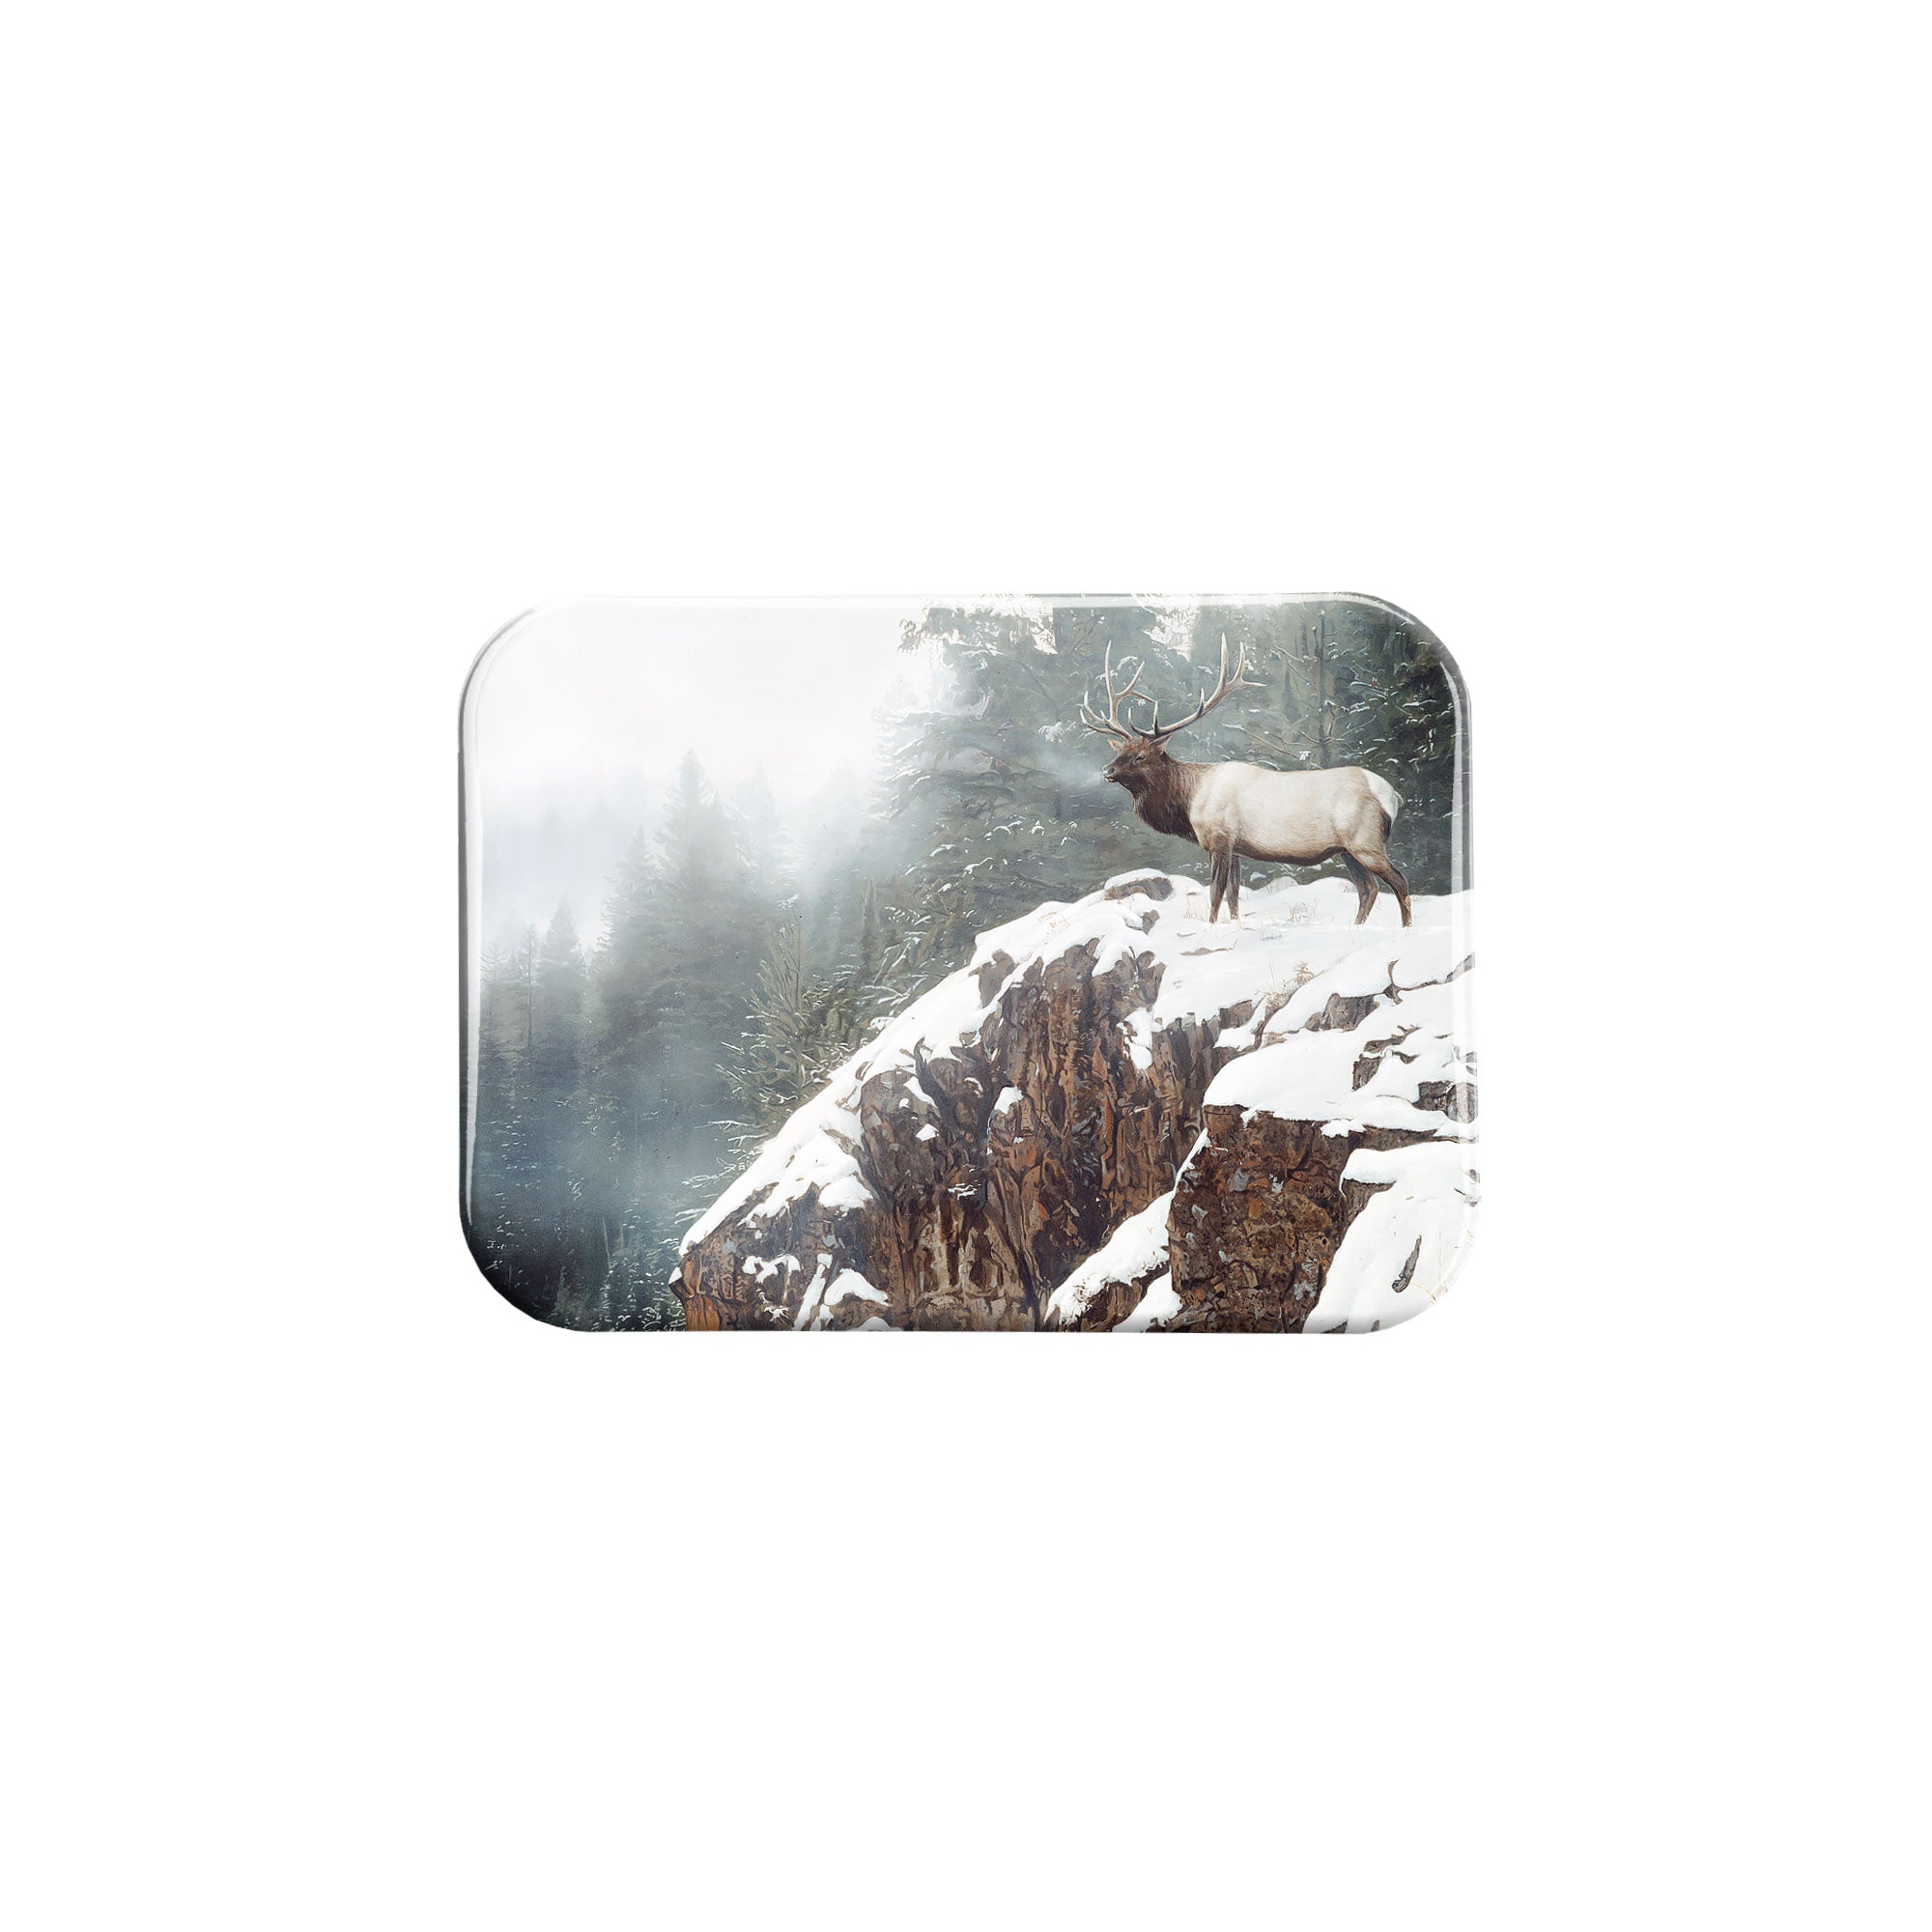 "King of the Mountain" - 2.5" X 3.5" Rectangle Fridge Magnets